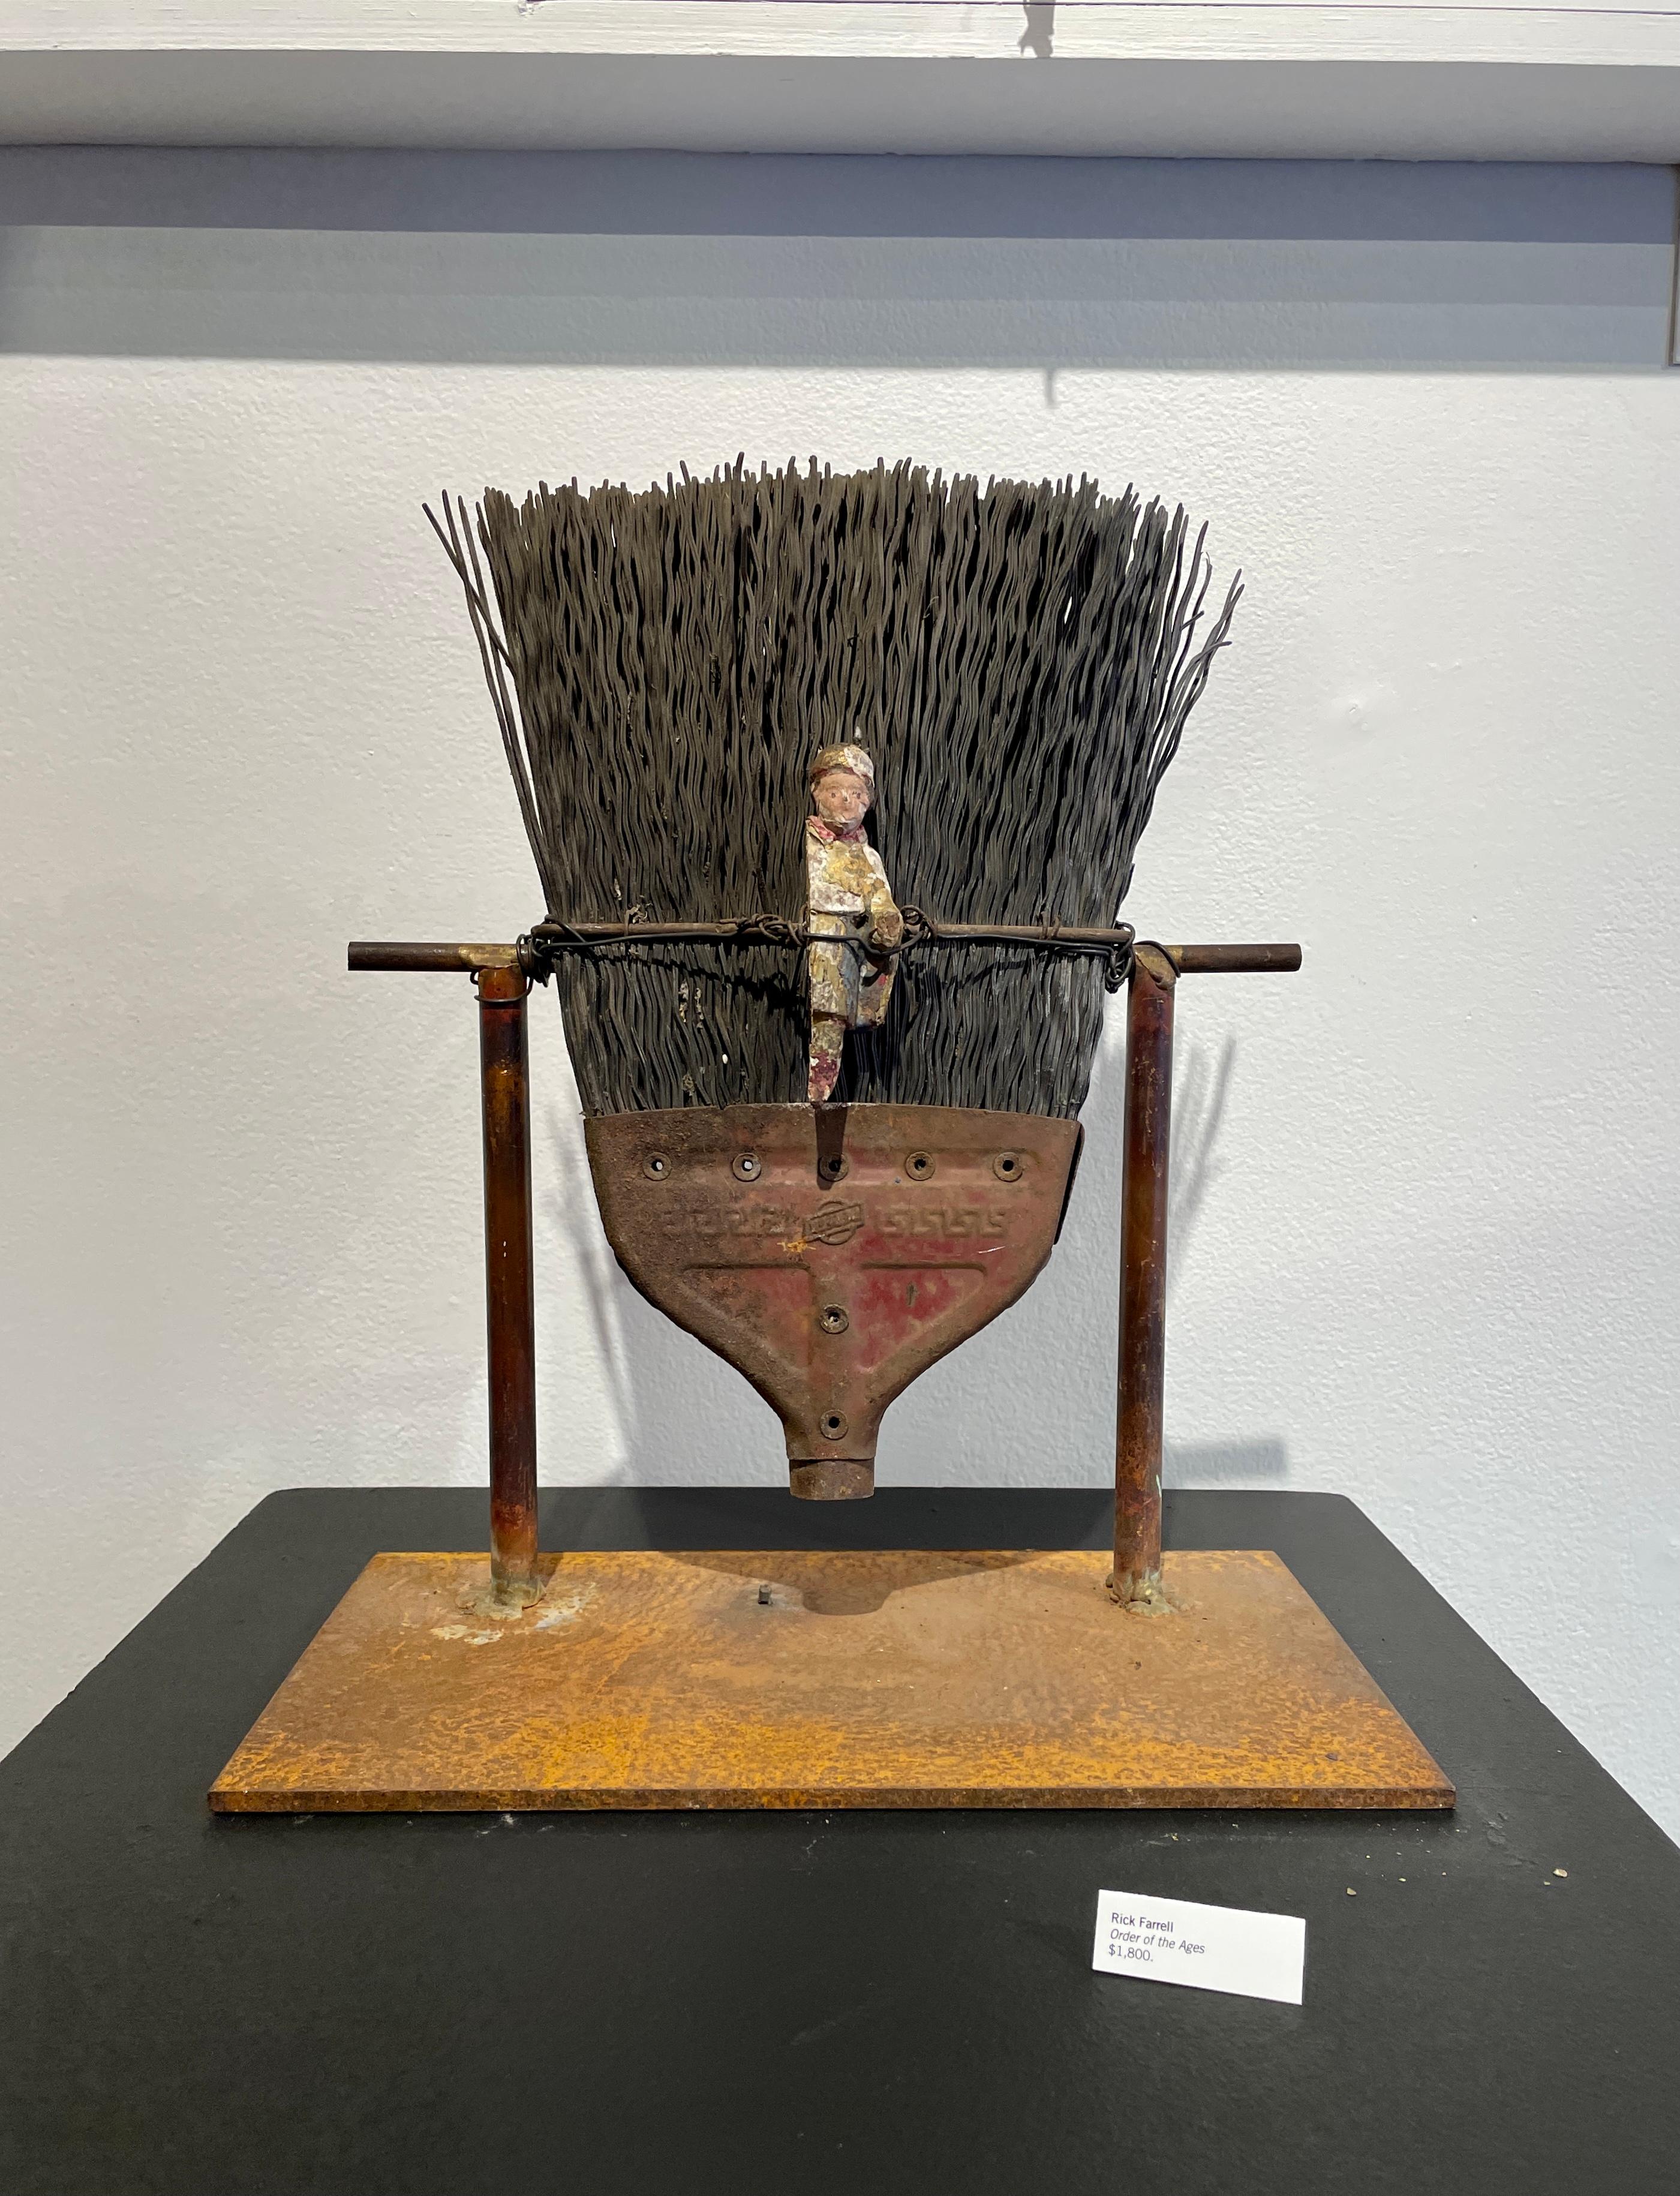 Order of the Ages - Found Object Sculpture with Heavy Bristle Brush & Figure For Sale 2